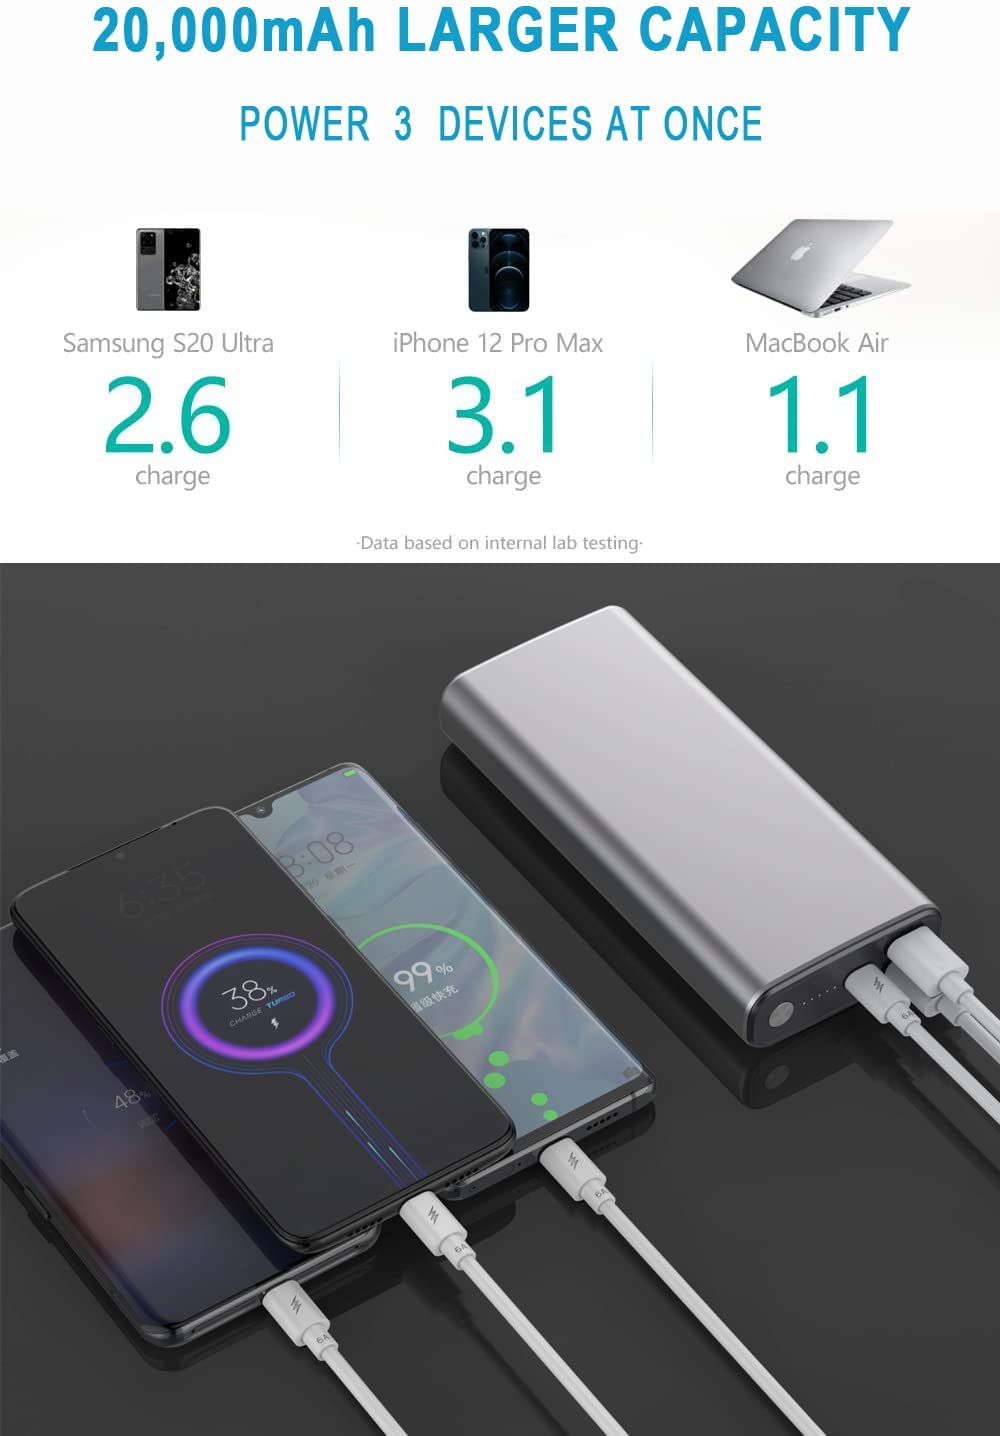 CORN Power Bank, 65W 20000mAh Laptop Portable Charger, Fast Charging USB C  4-Port PD3.0 Battery Pack for MacBook Dell XPS IPad iPhone 14/13/12 Pro  Mini Samsung Switch 